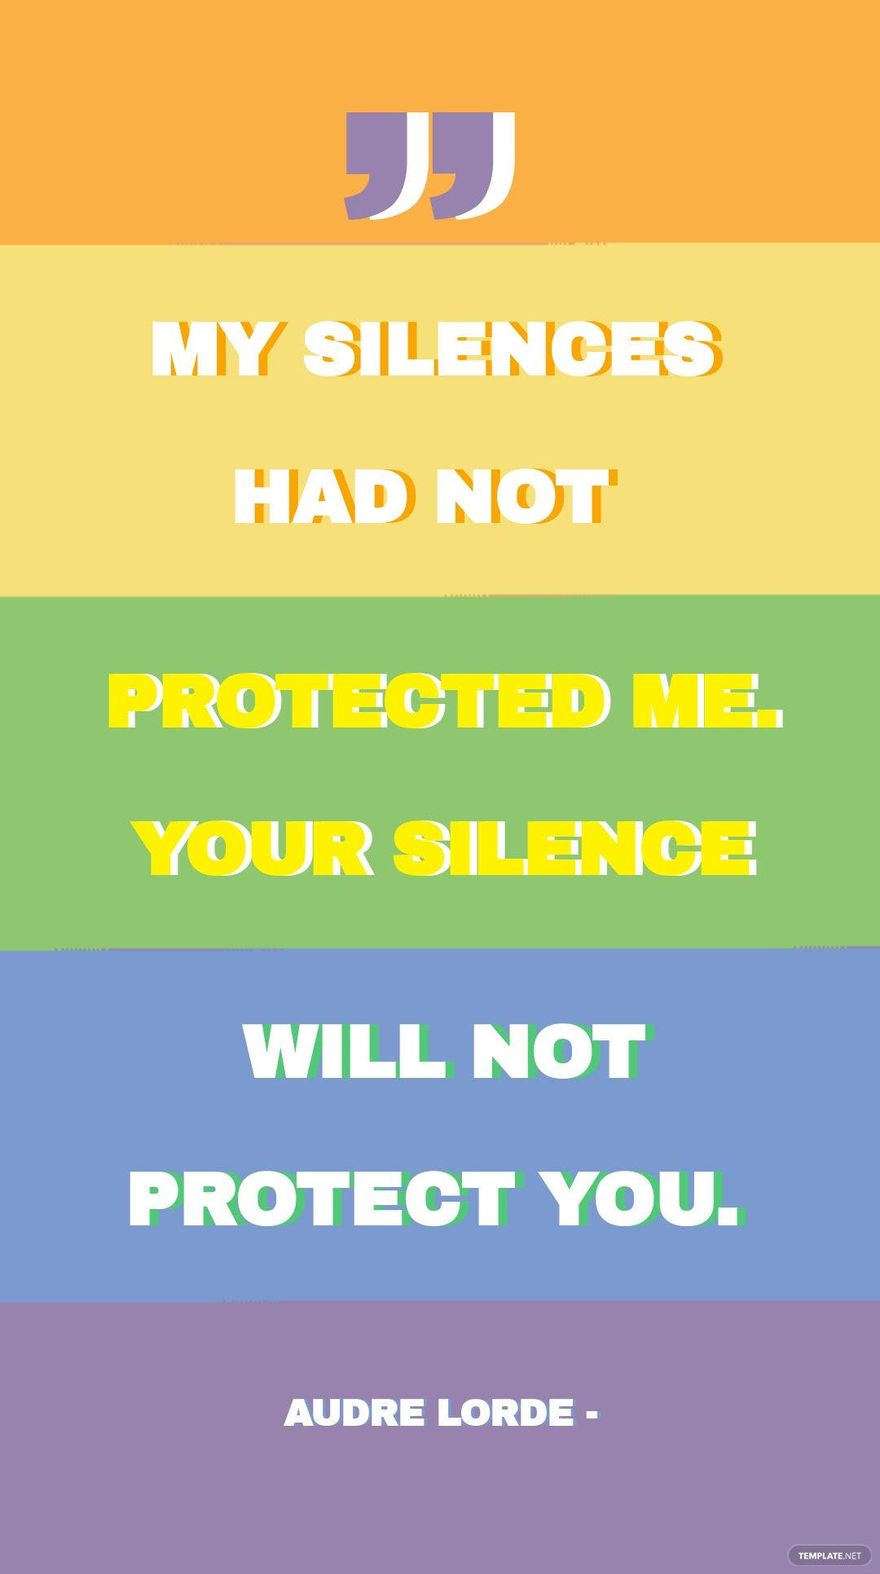 Free Audre Lorde - My silences had not protected me. Your silence will not protect you. in JPG